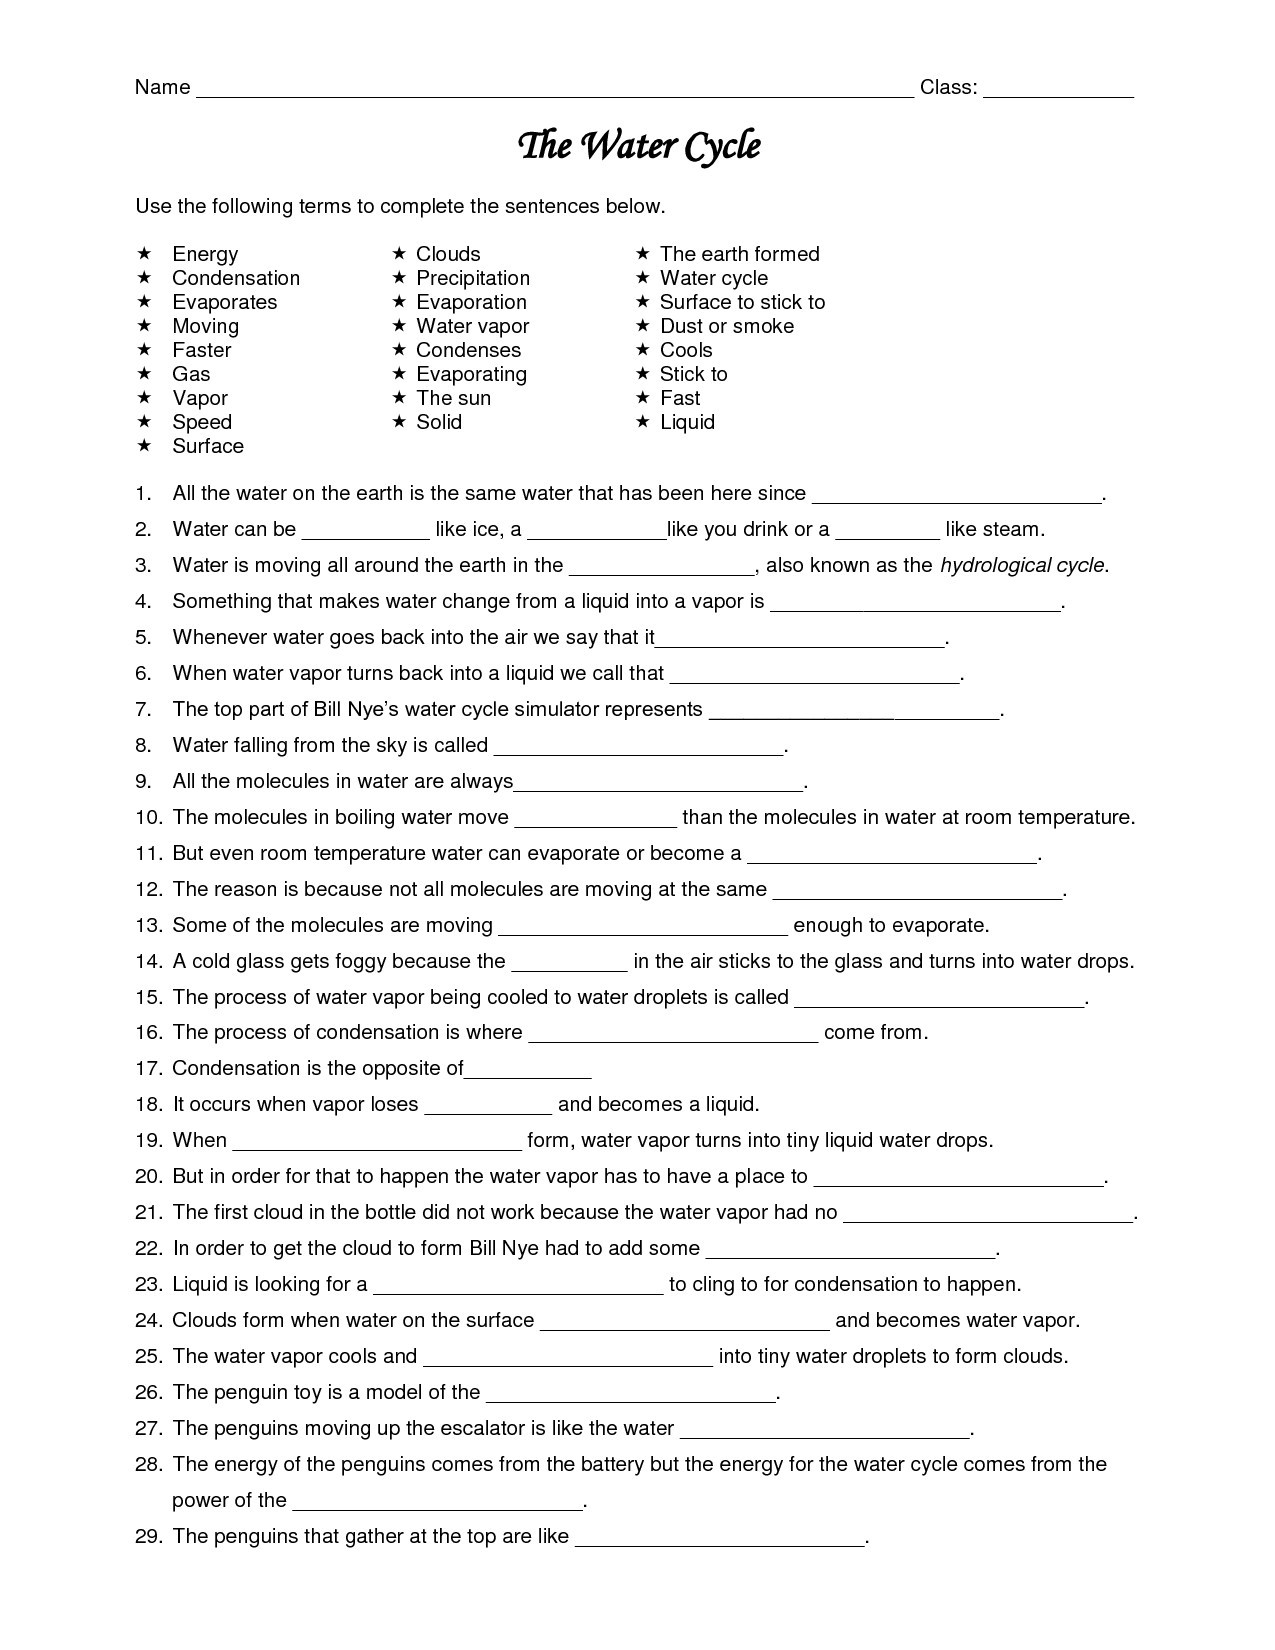 The Water Cycle Worksheet Answers Unique Water Cycle Worksheet Answers